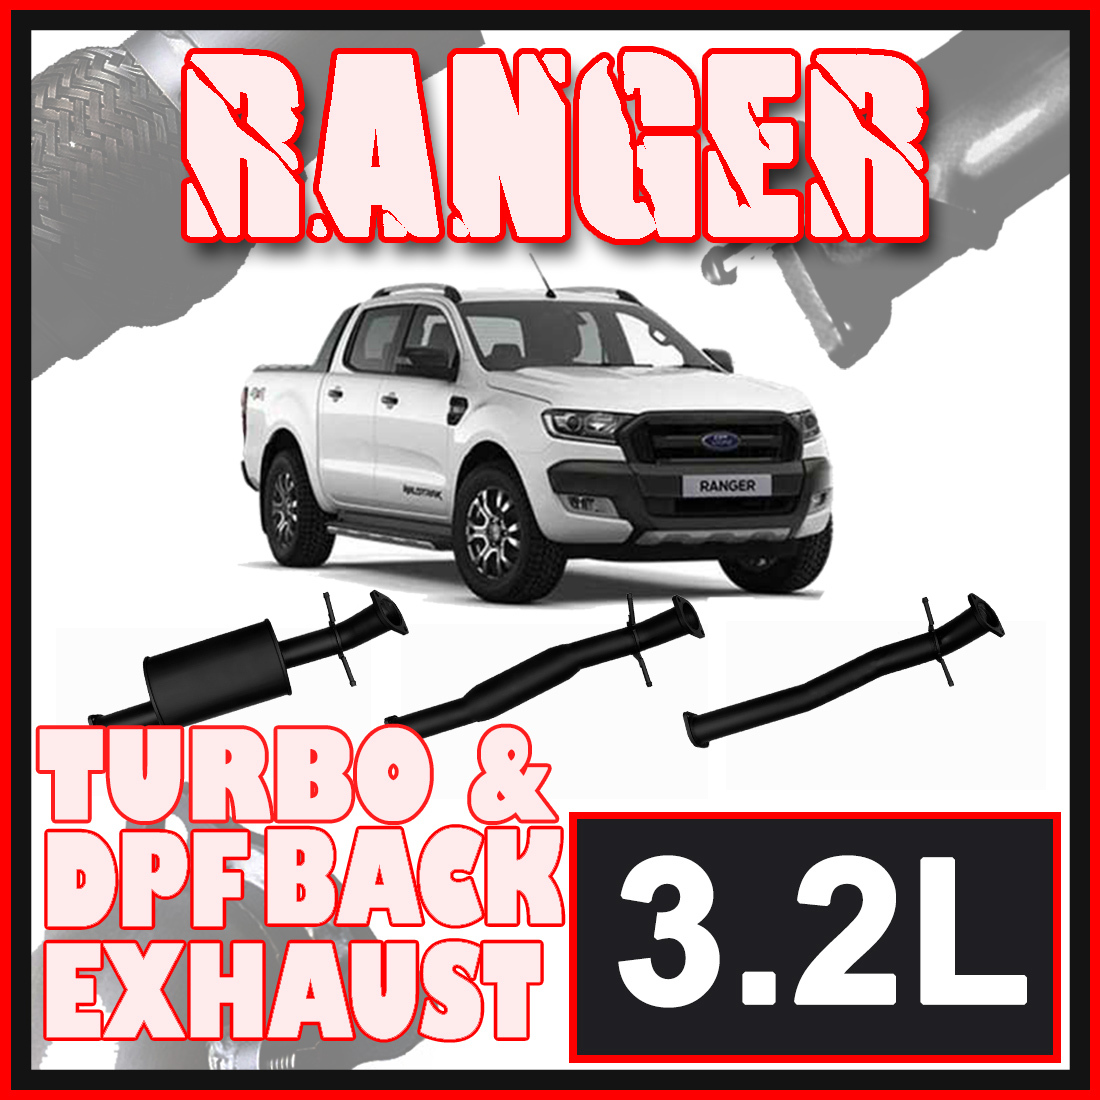 Ford Ranger PX/PX2/PX3 3.2L DPF Model Ignite Exhaust image